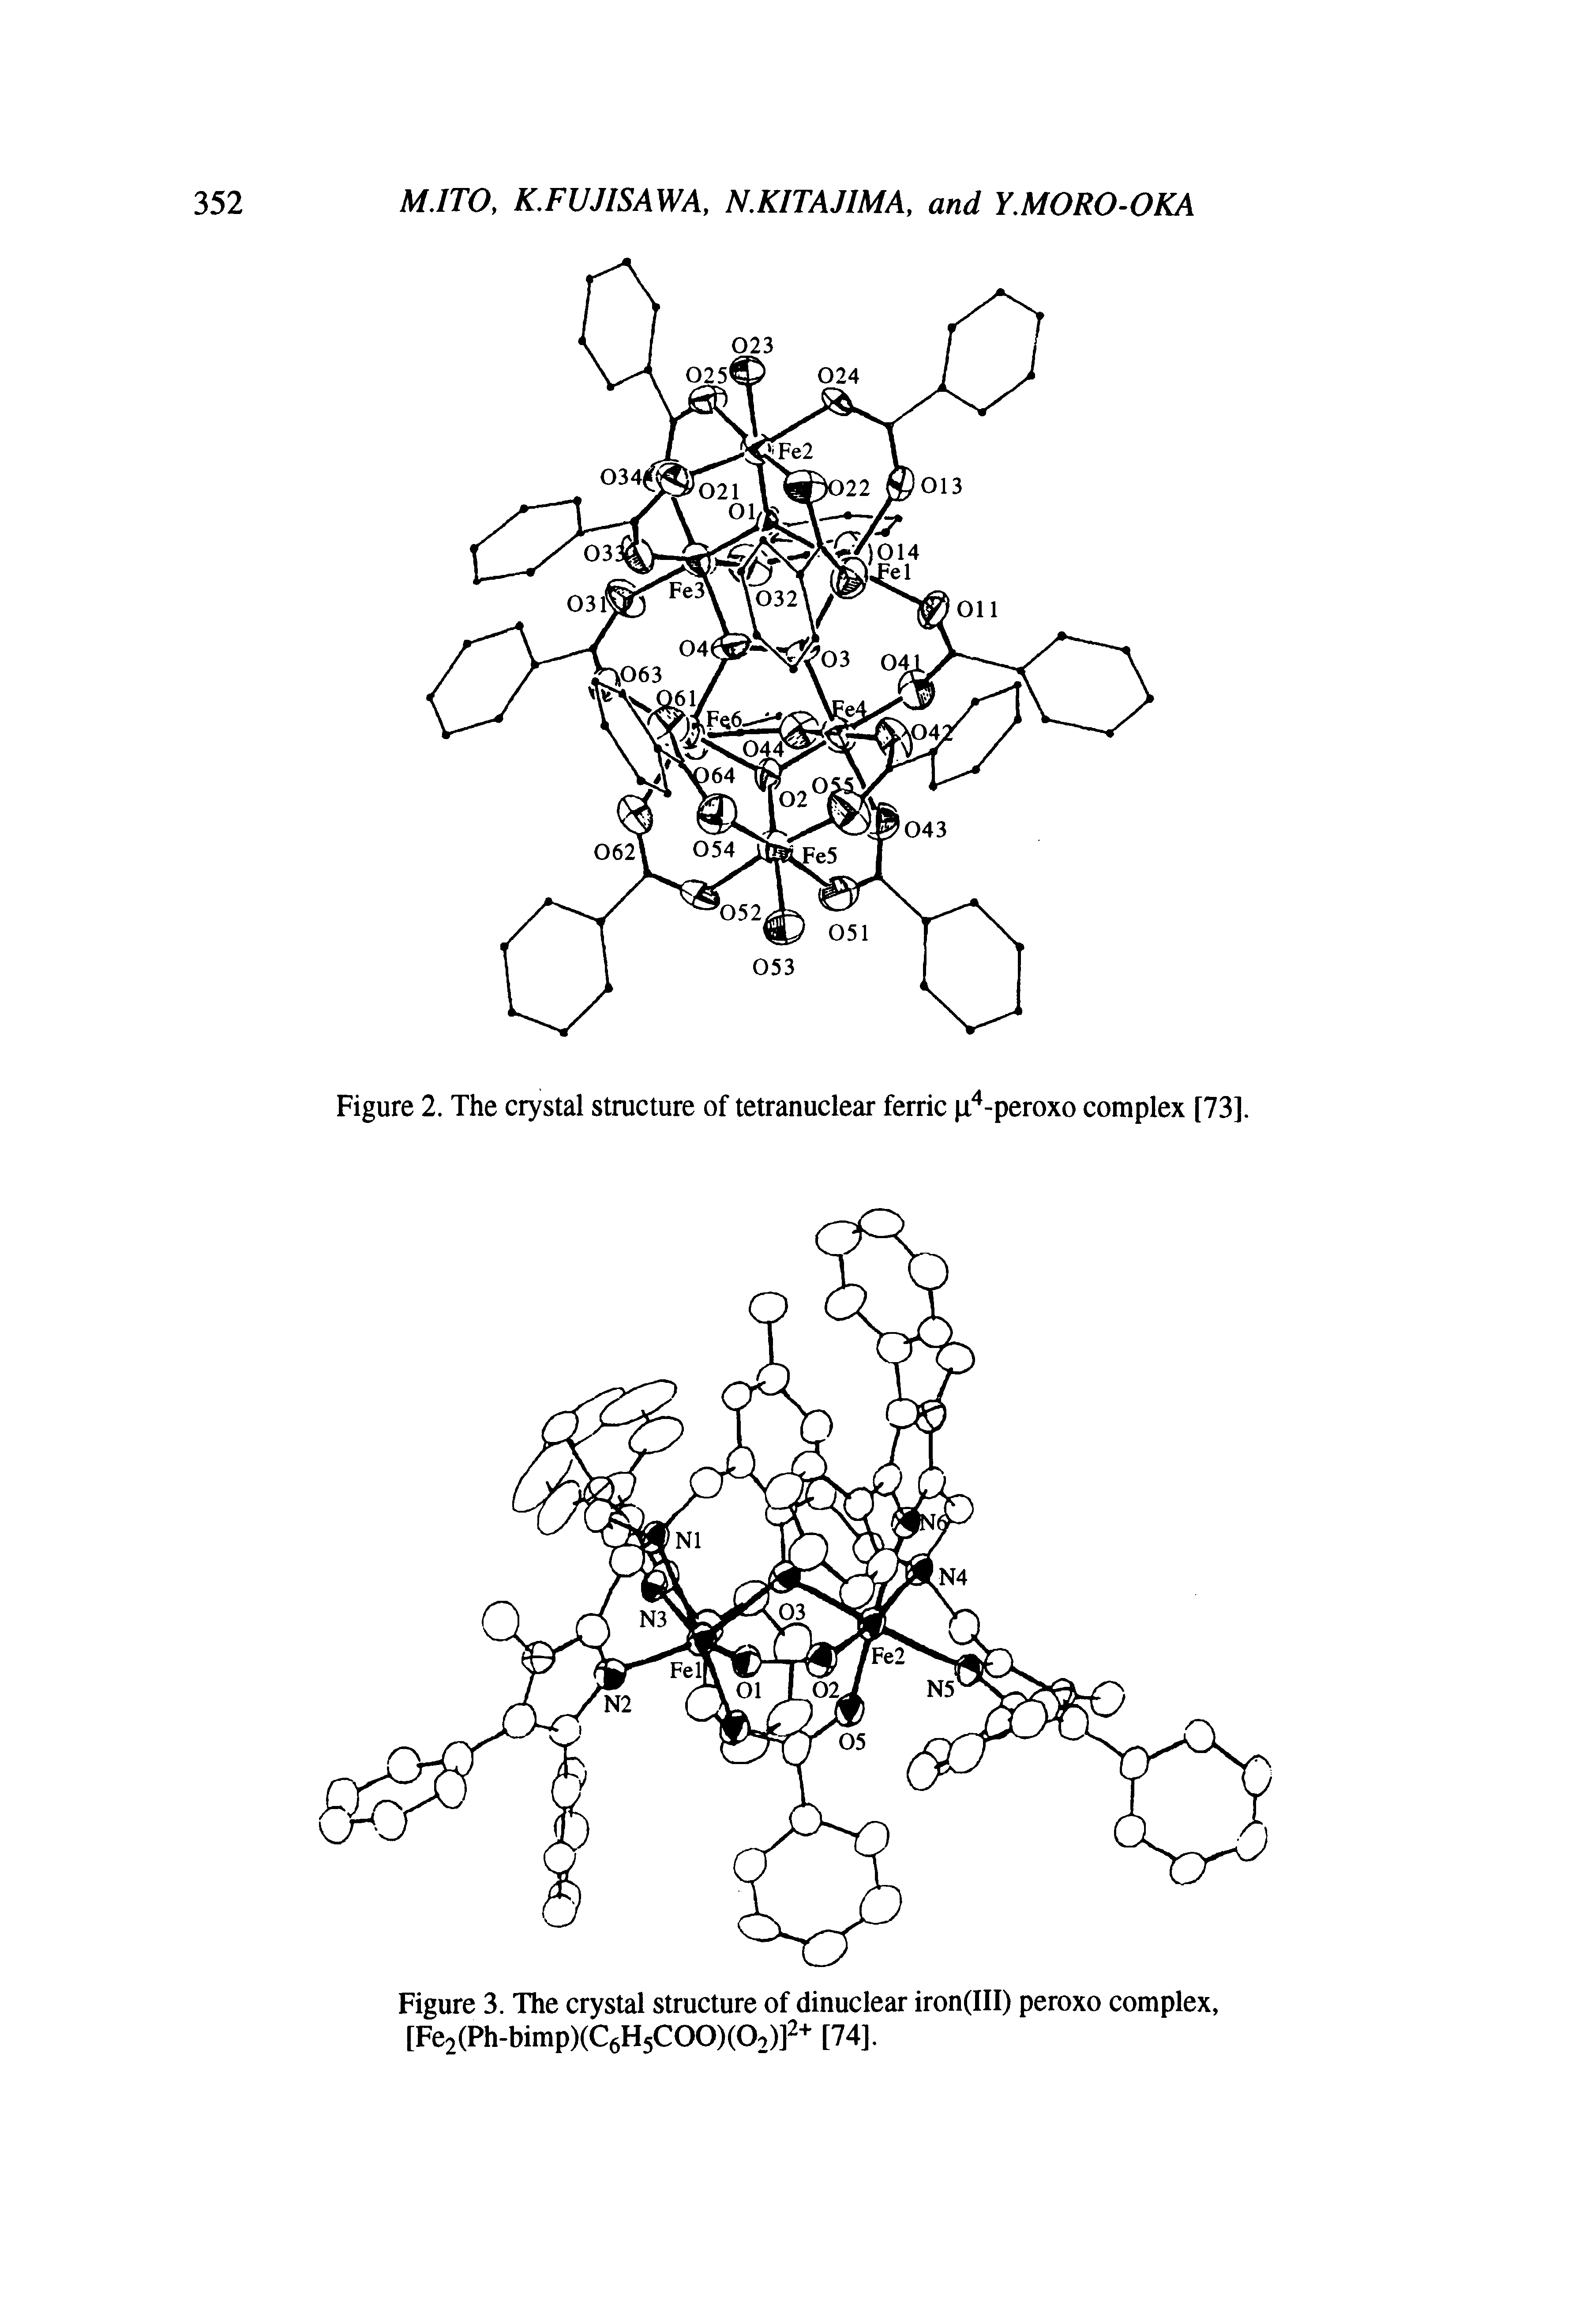 Figure 2. The crystal structure of tetranuclear ferric I -peroxo complex [73].